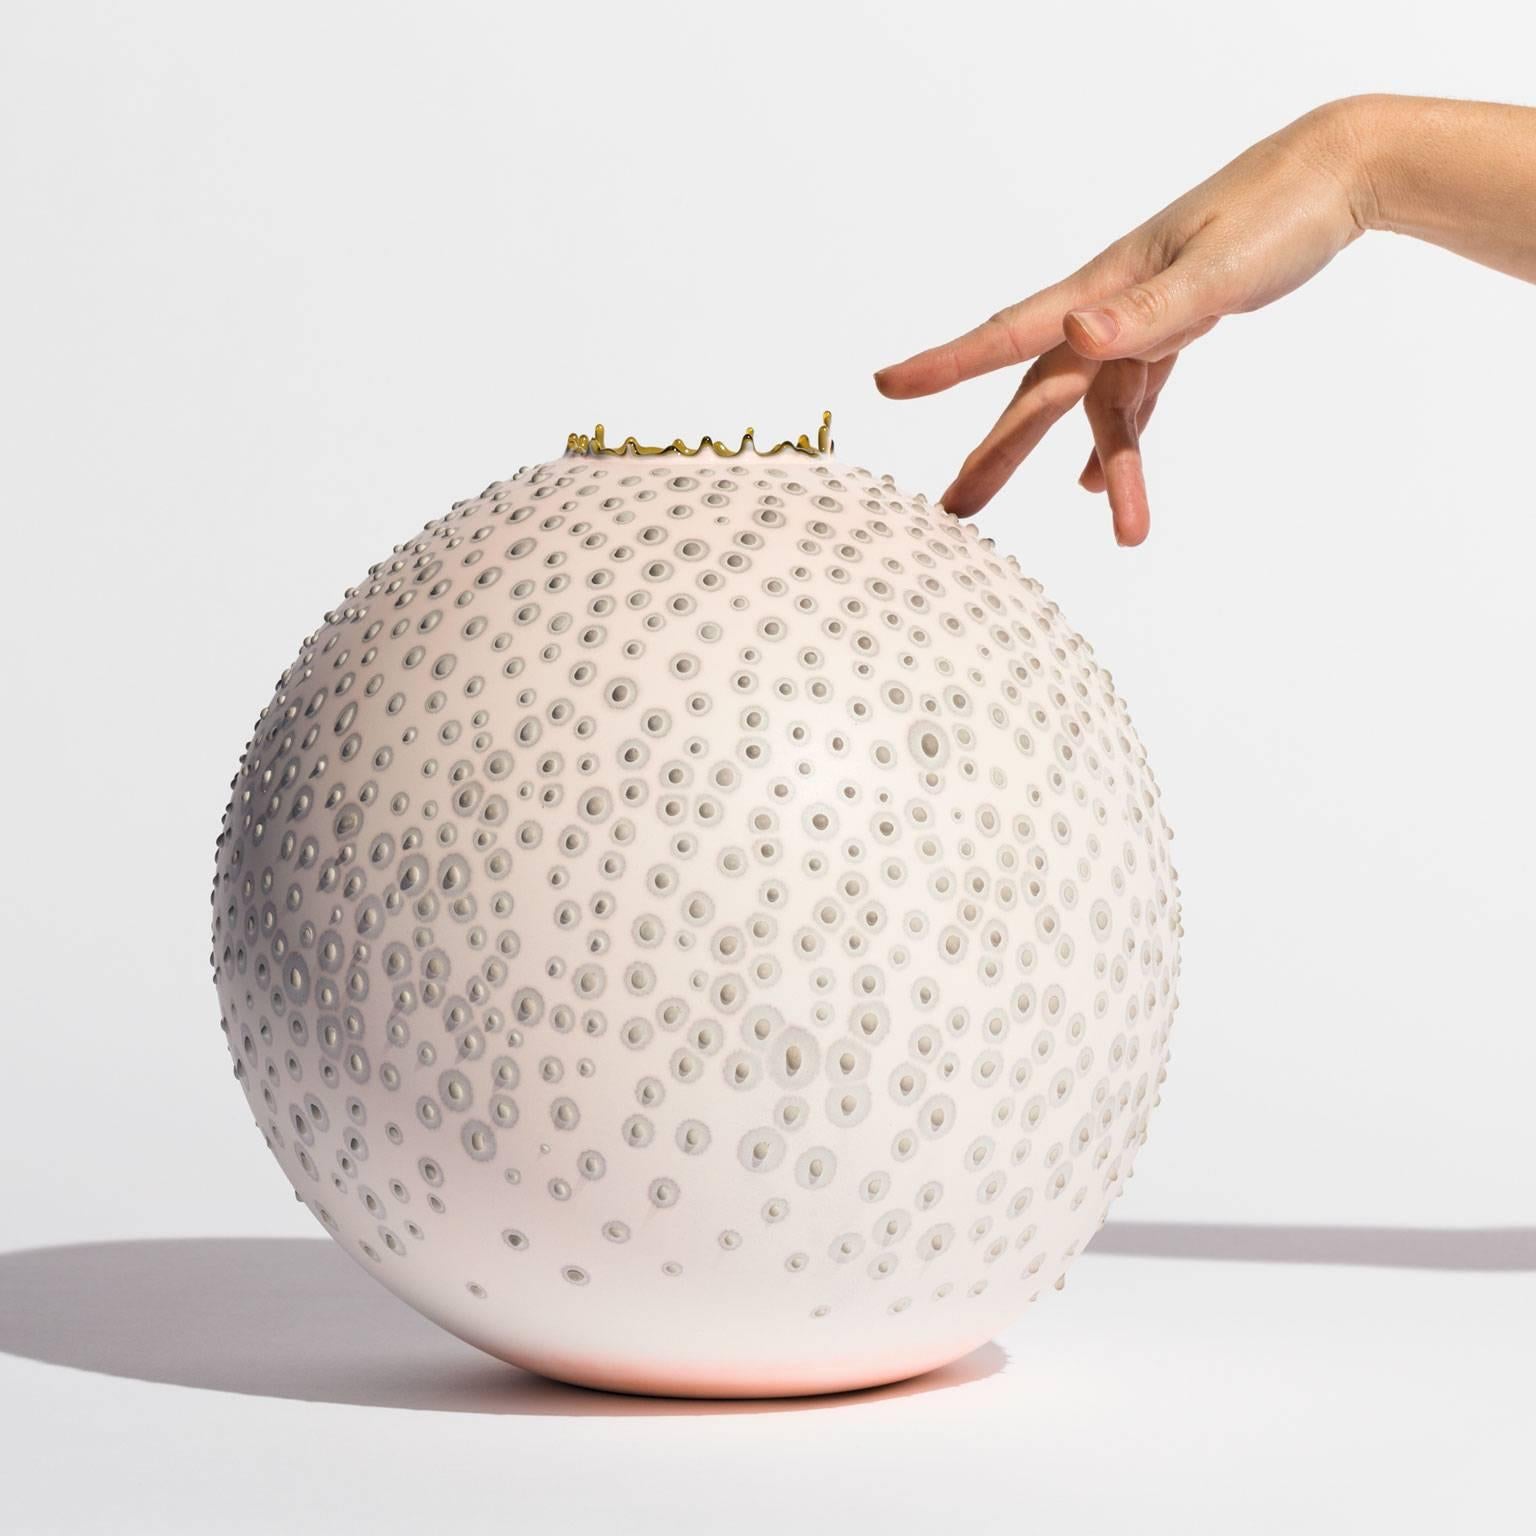 This soft-hued, playful one of a kind vase is handmade by artist Elyse Graham in her Los Angeles studio.

This collection of vessels is inspired by our incredible and diverse microbiome.

The artist is known for her striking color palette and